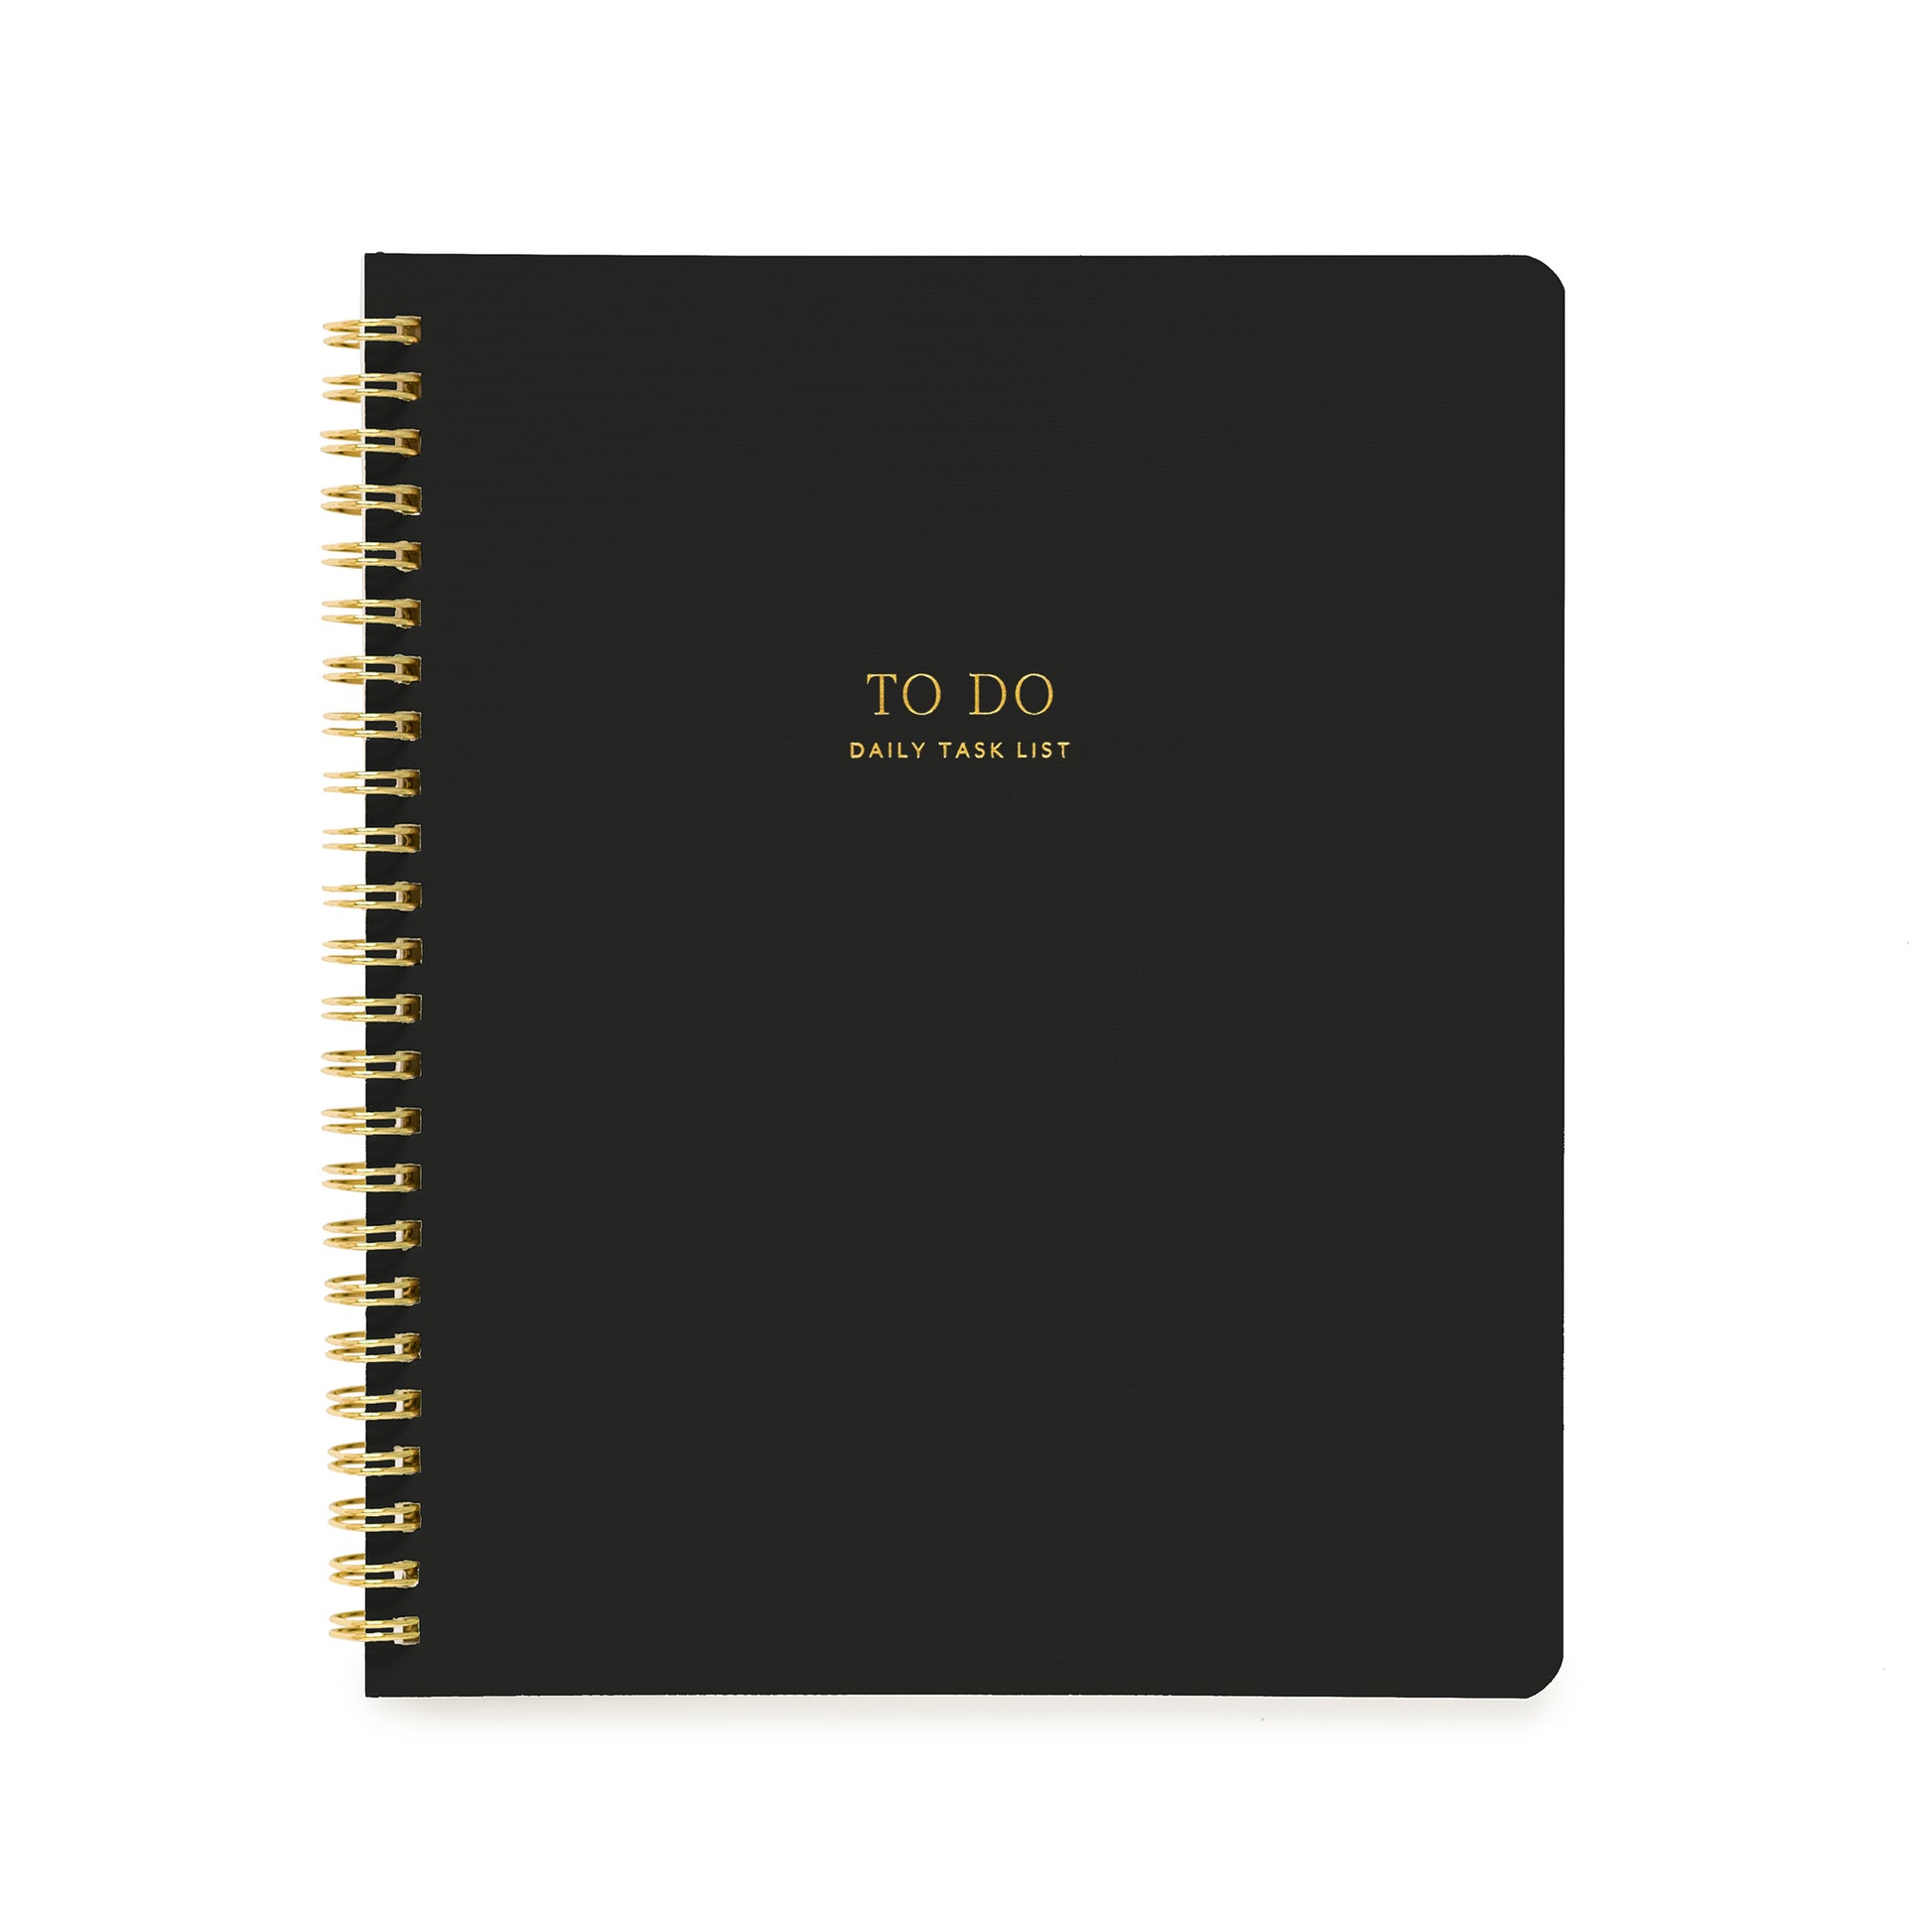 Black spiral notebook with gold foil to do daily task list foil stamped